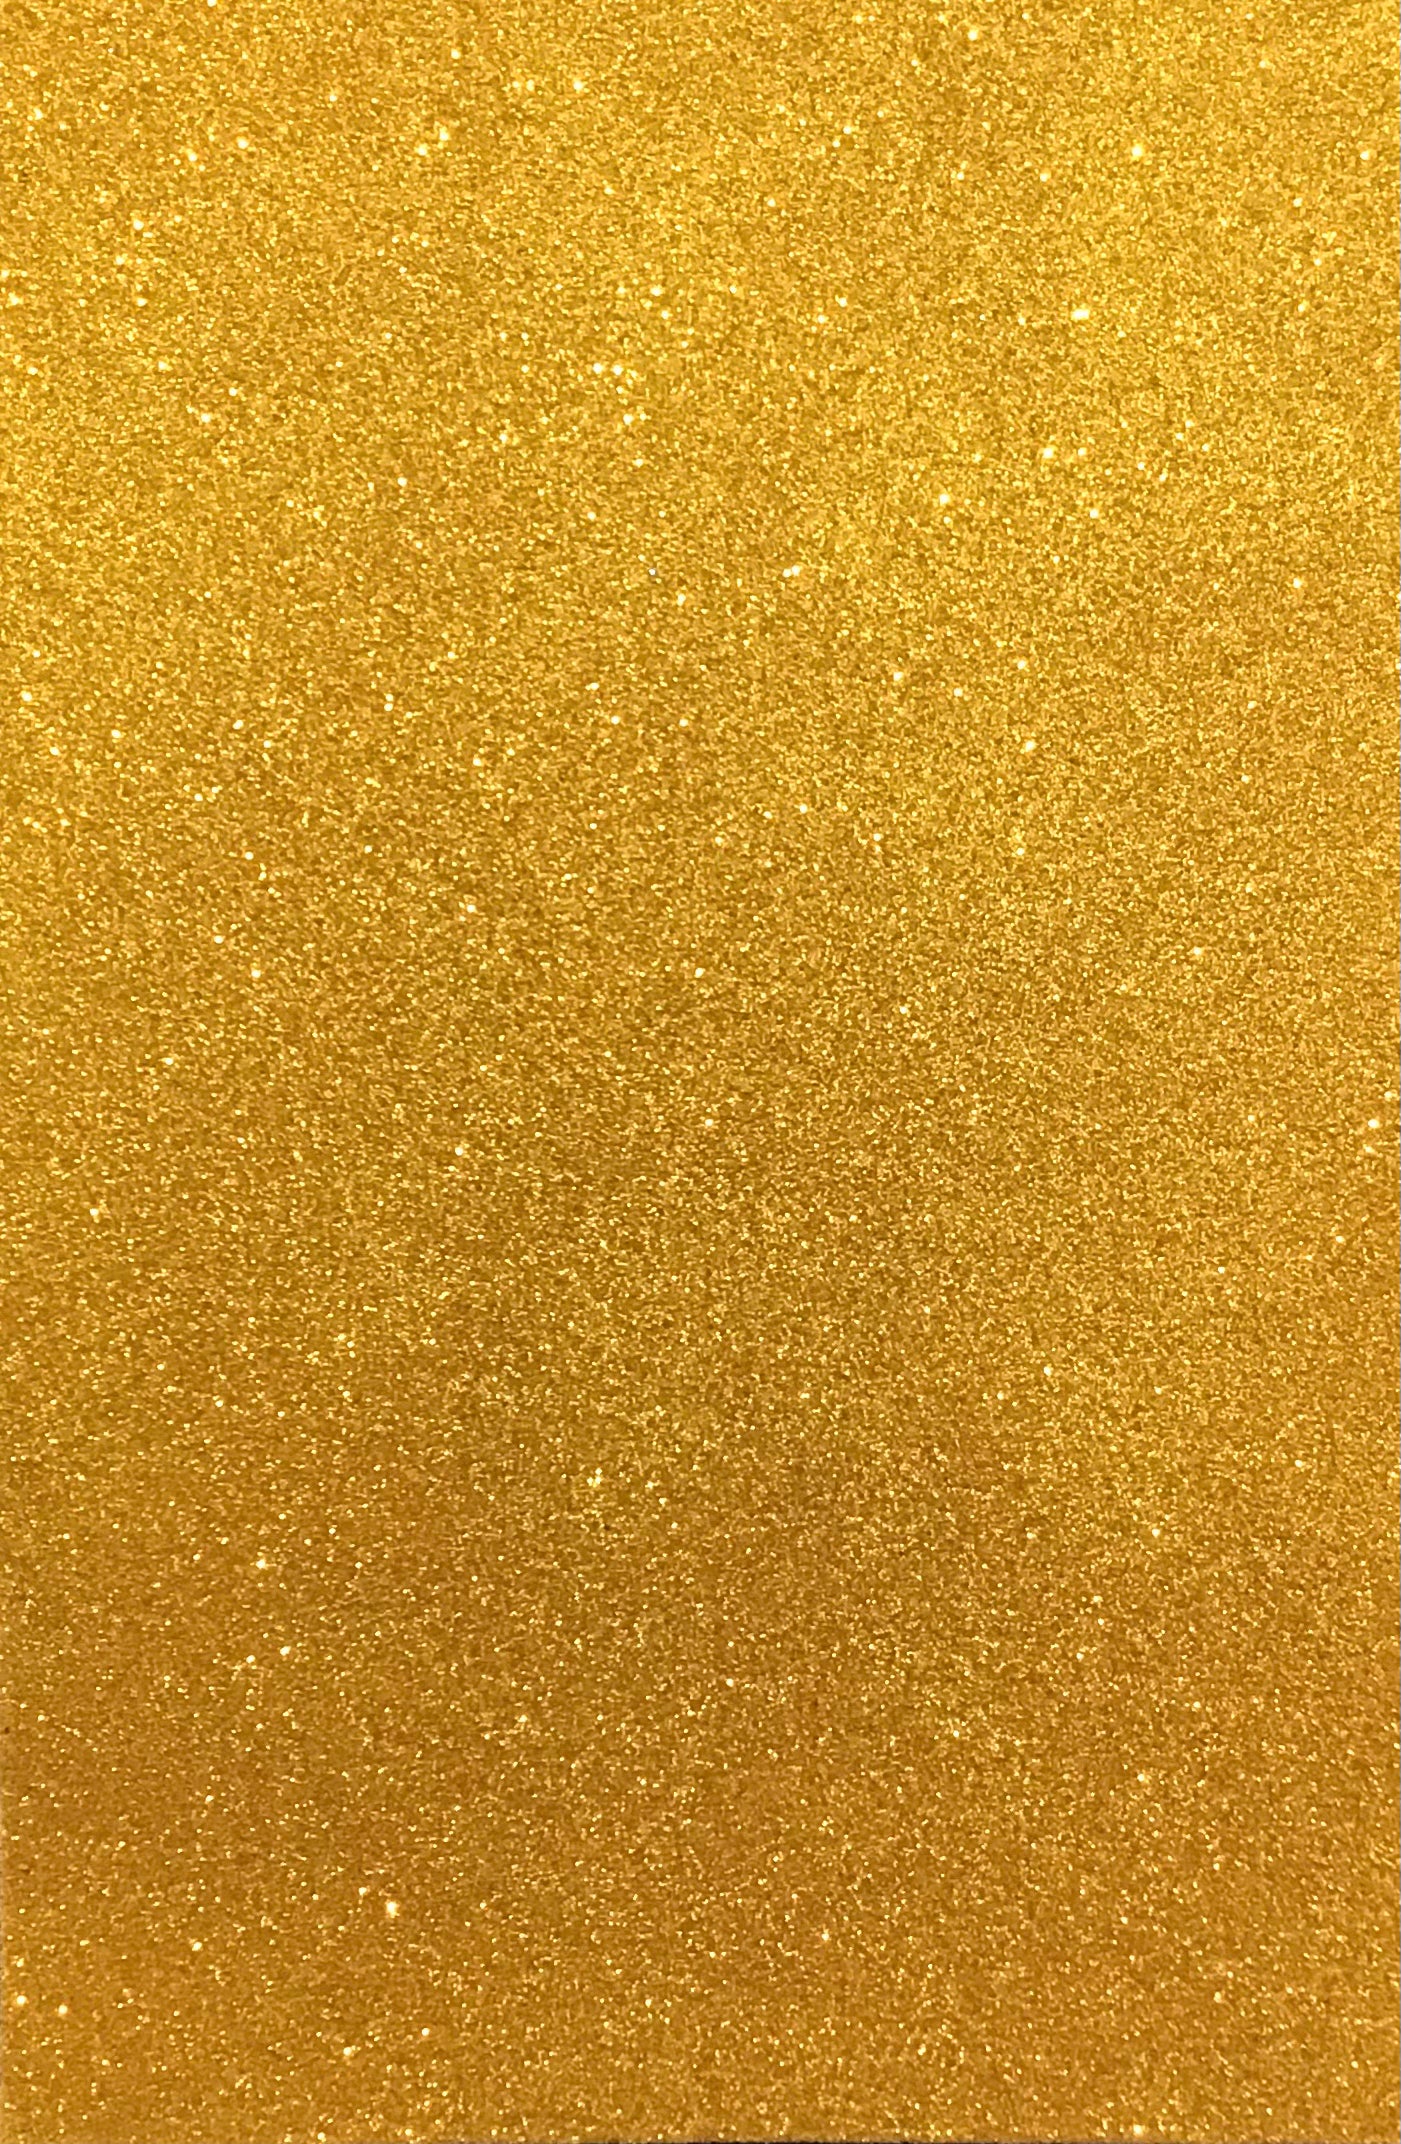 Craft Foam Glitter Yellow Gold - Size Approx 30 x 20cm - Thickness Approx 1.5mm